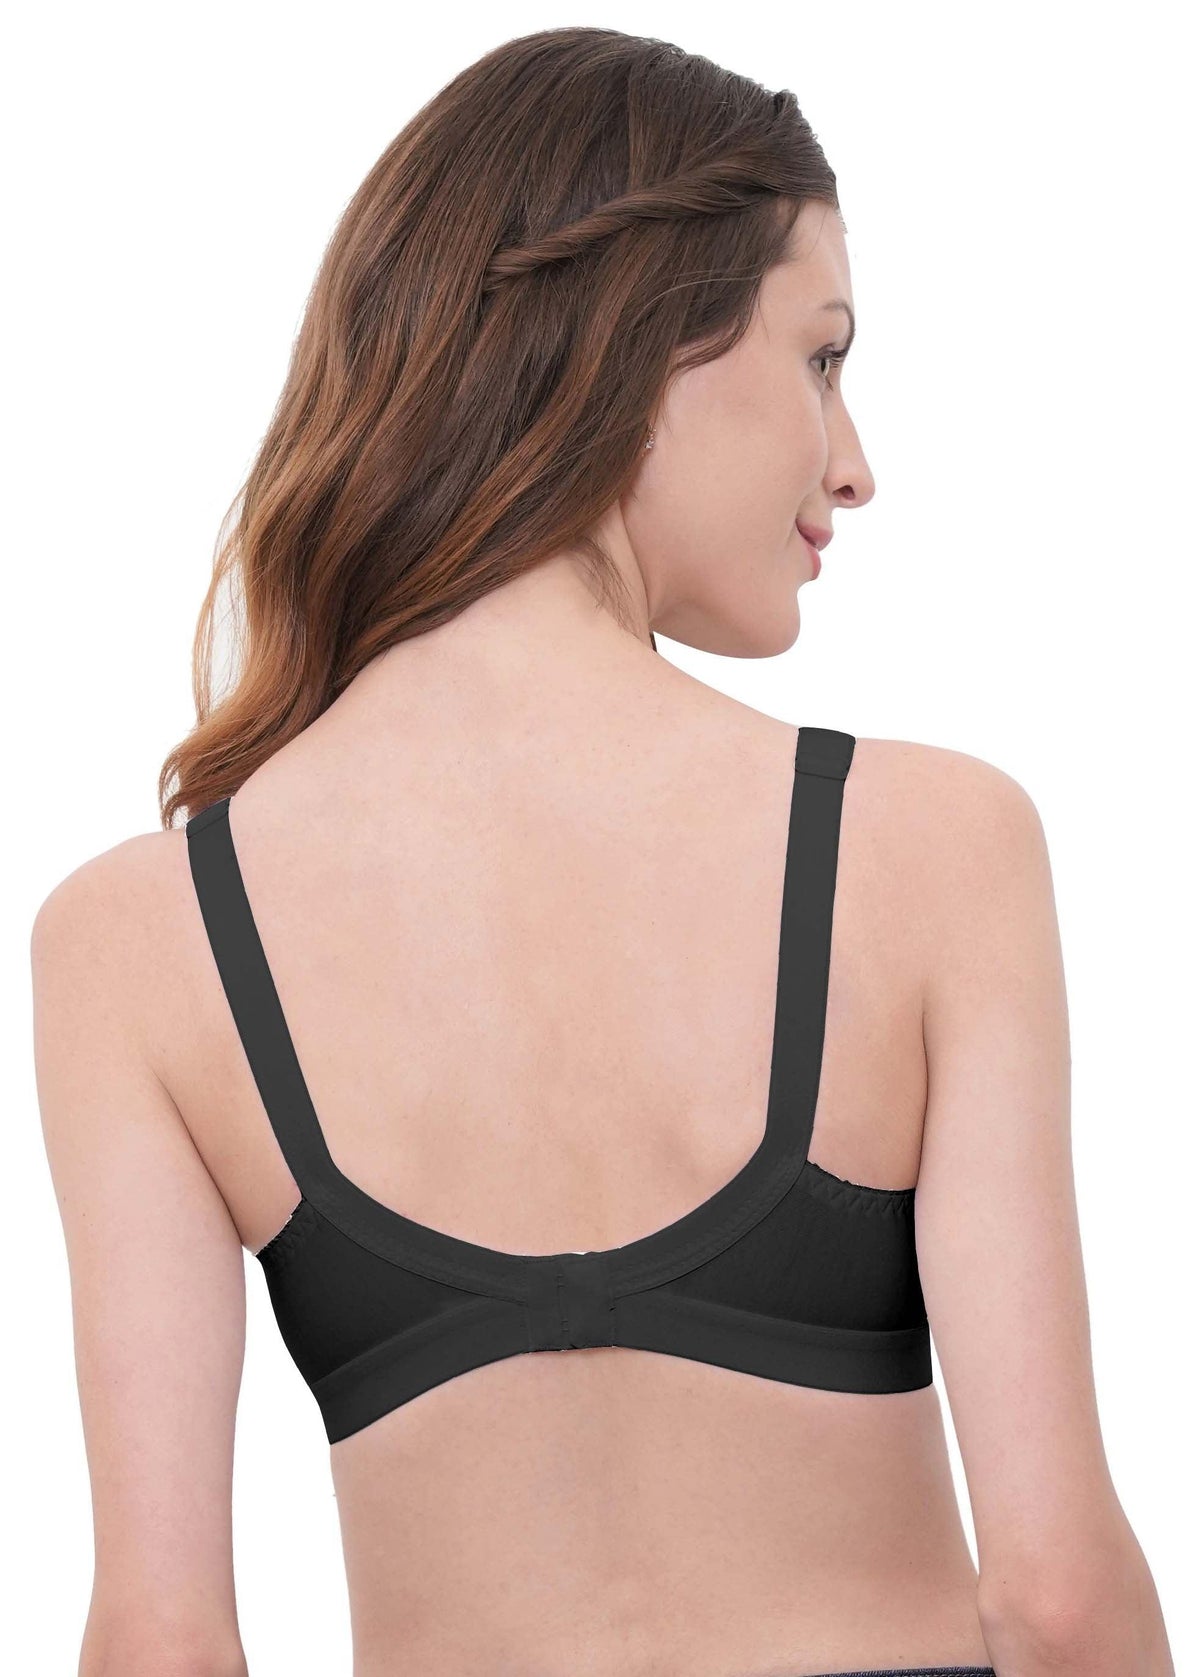 26% OFF on Eve's Beauty Full Coverage C Cup Bra - Pack Of 6 on Snapdeal